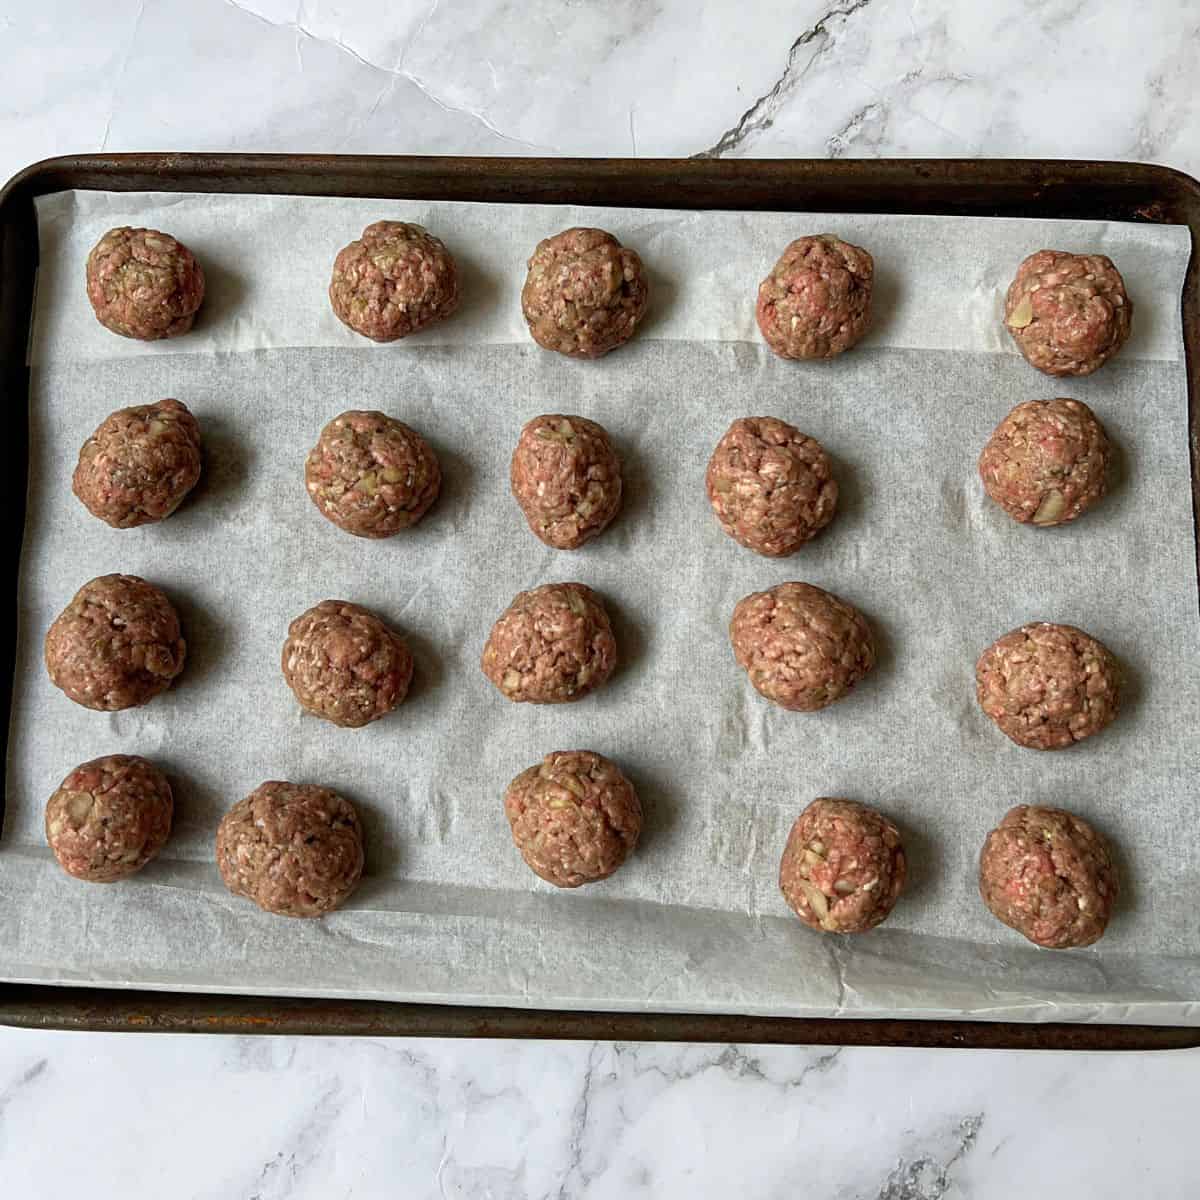 20 raw meatballs on a baking tray.